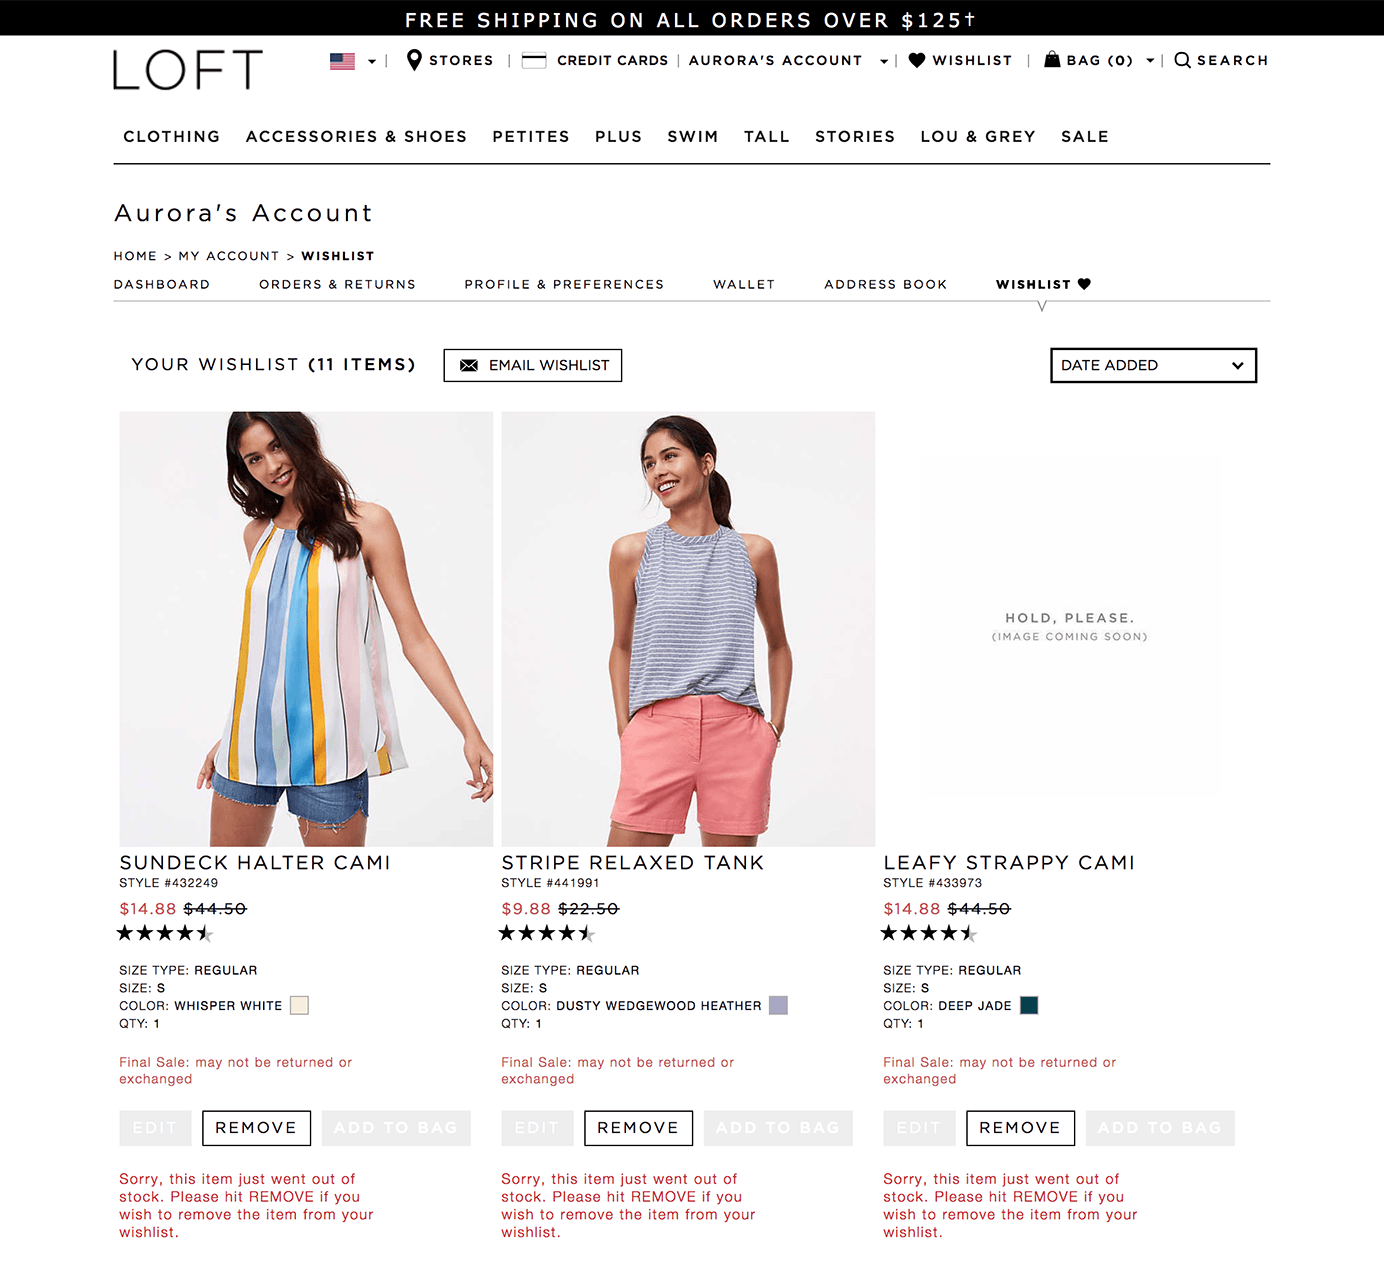 Screenshot of out of stock items on wish list at Loft website